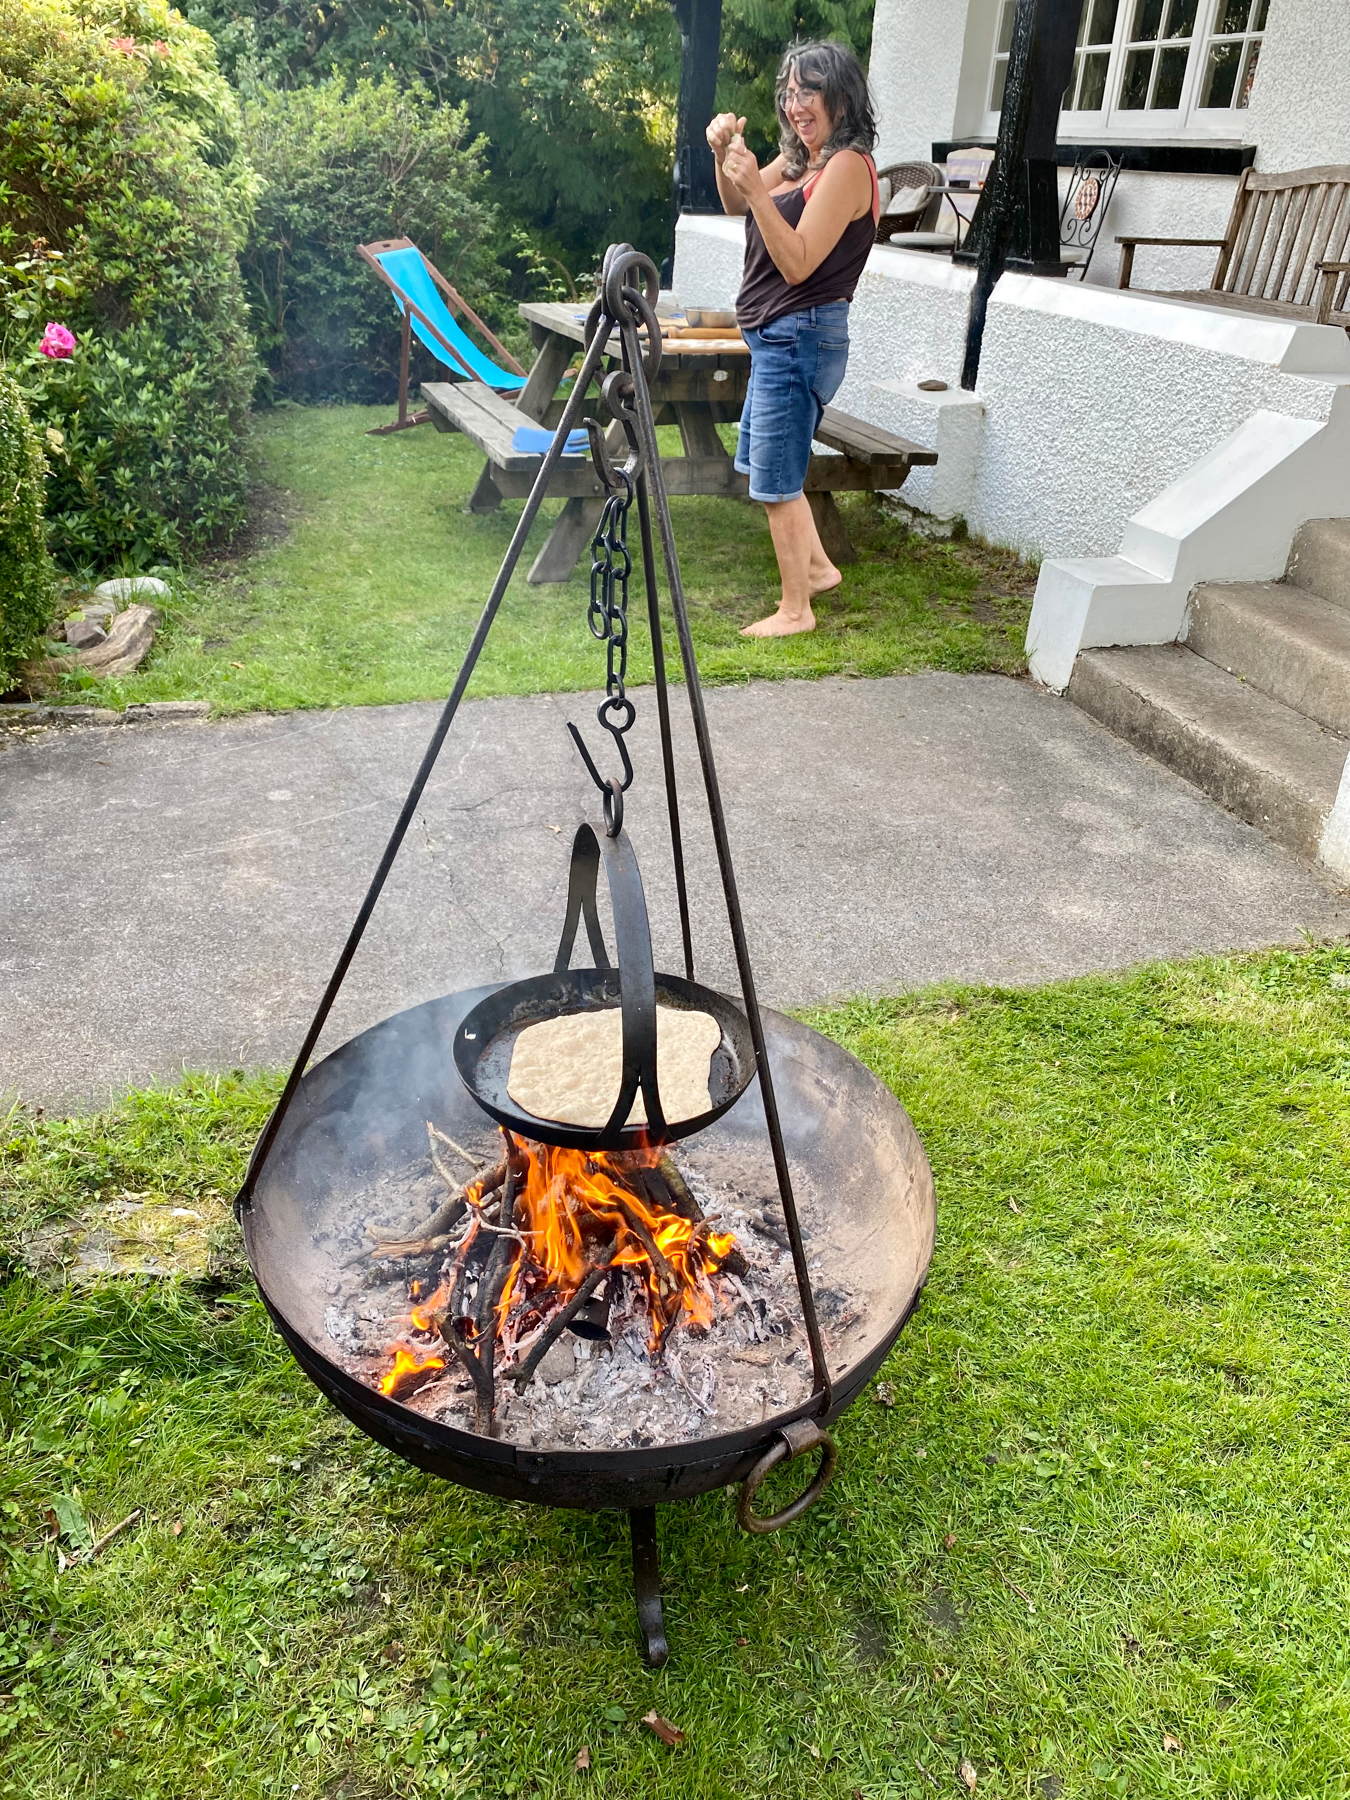 Fire pit with tripod and suspended skillet. Flatbread on skillet